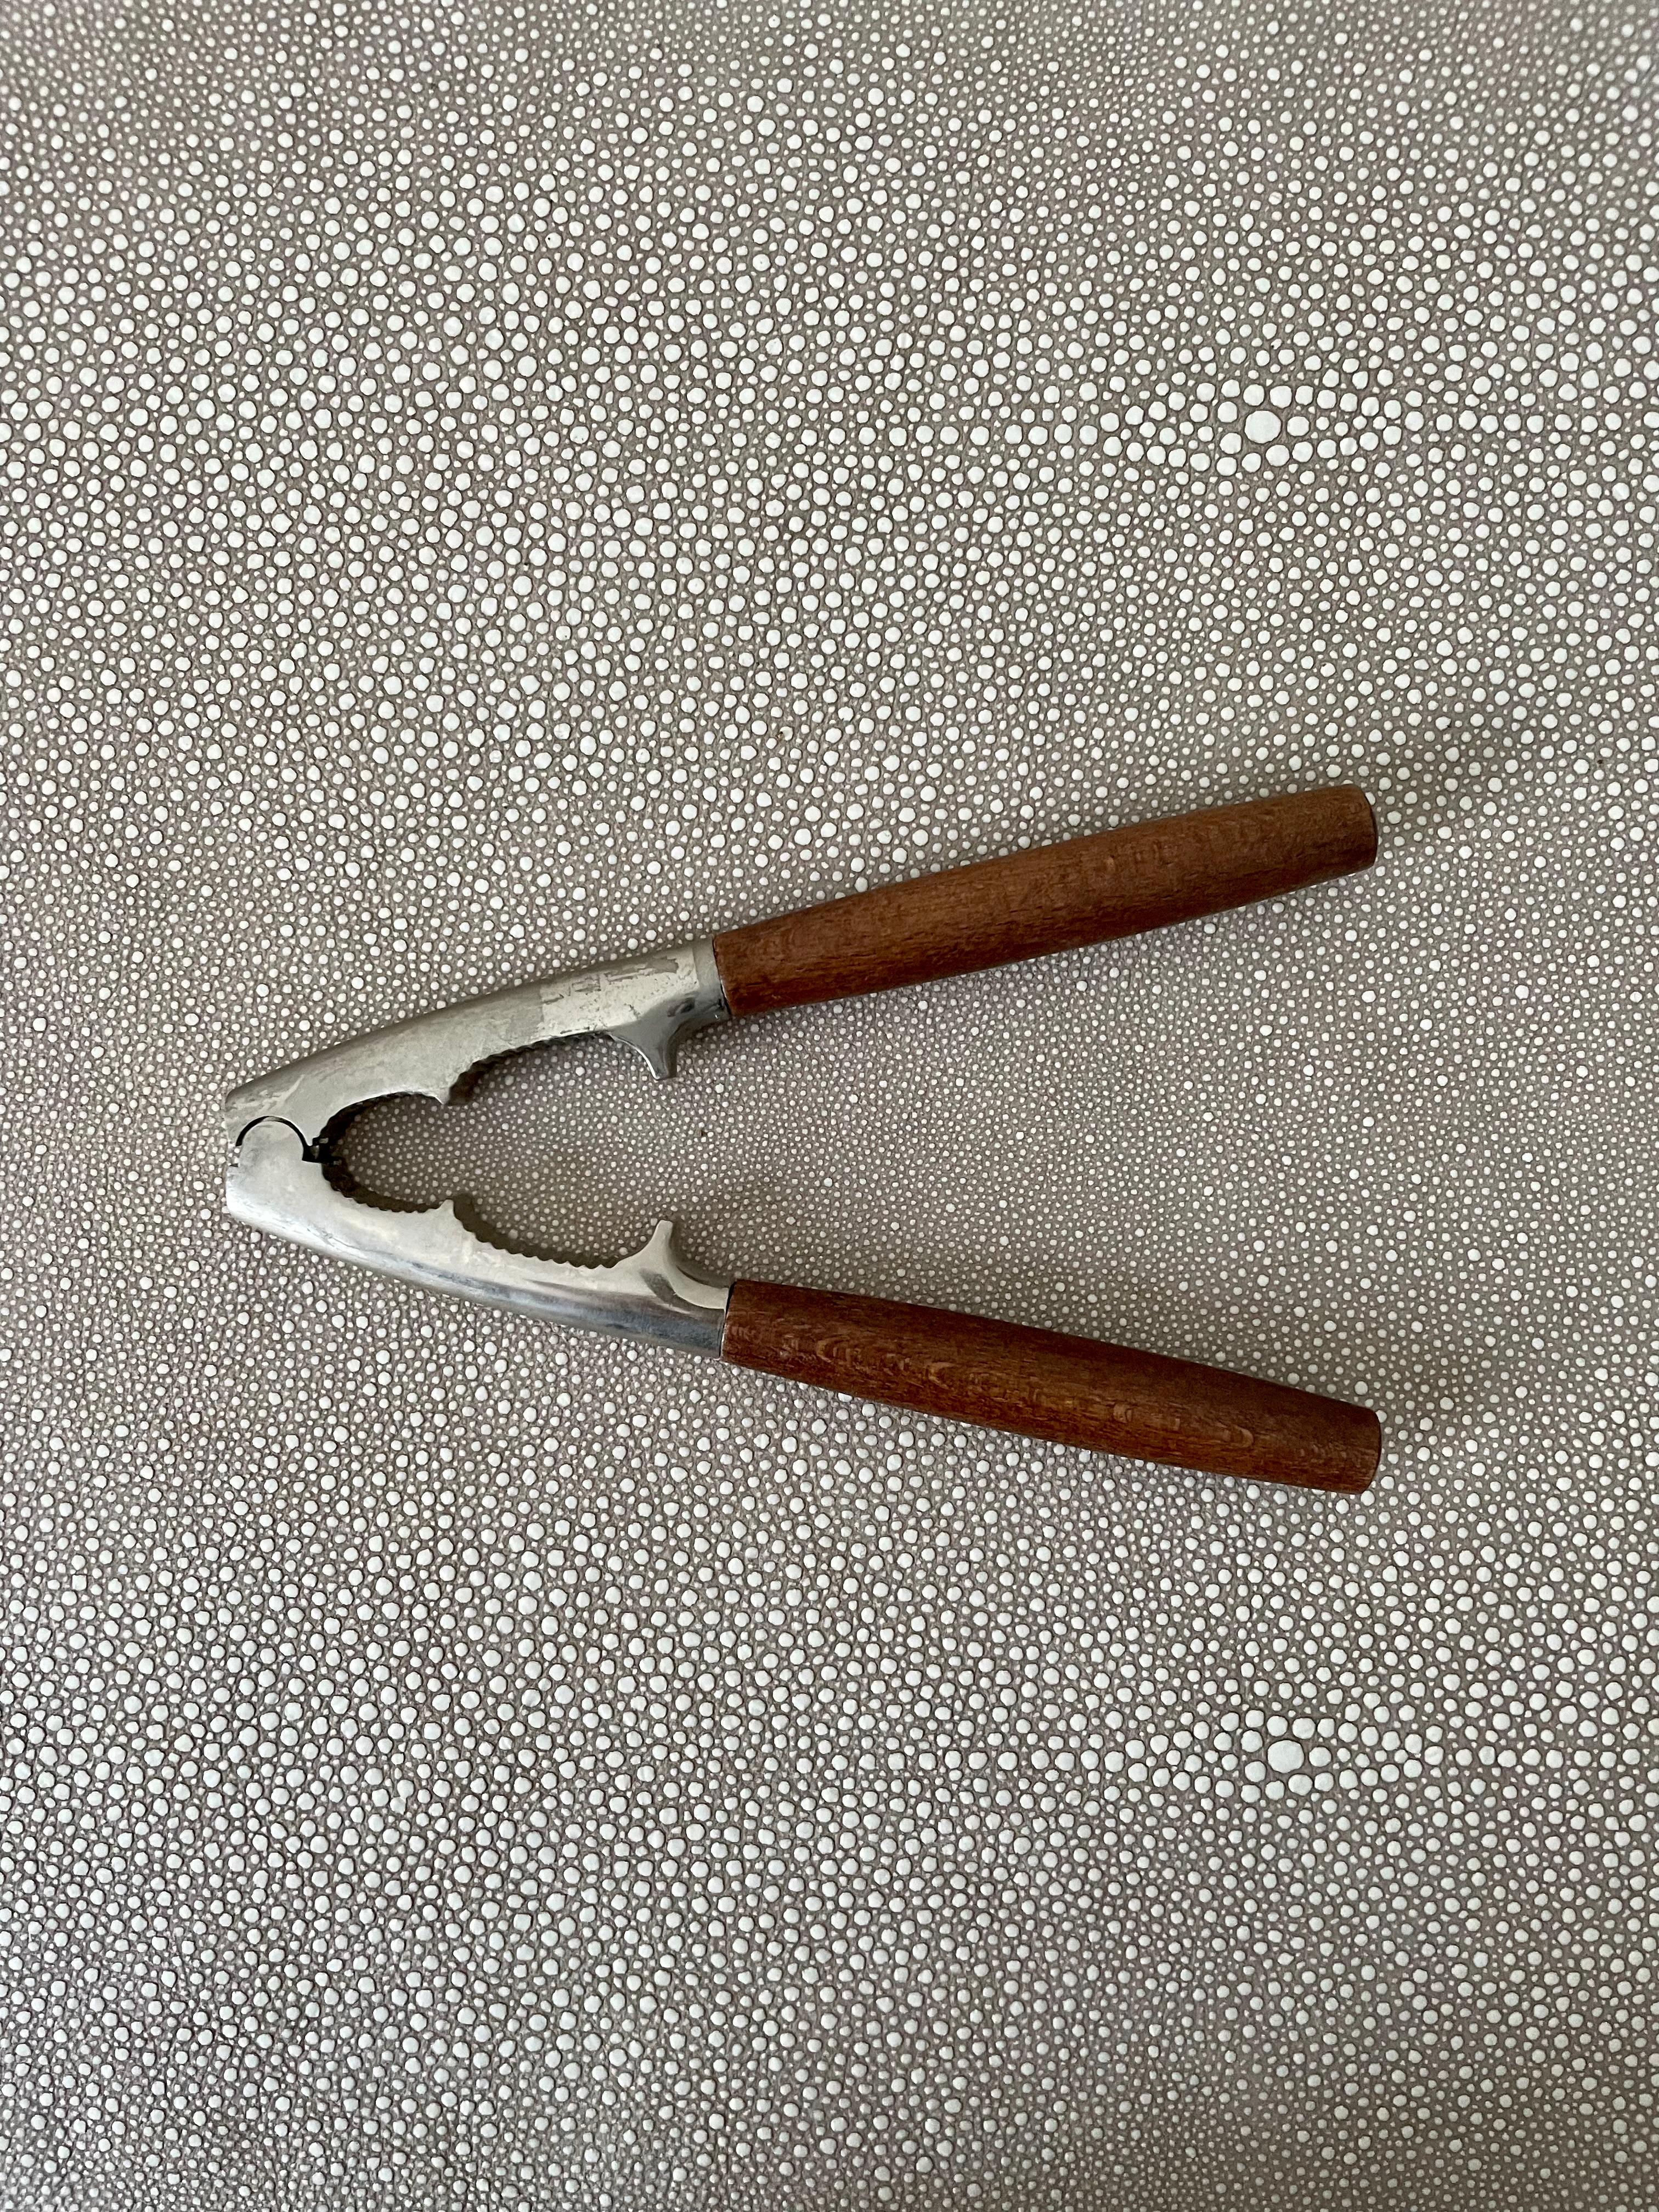 This sturdy nut cracker with solid teak wood handles has stood the test of time and bears memories of summer walnuts cracked in grandparents' homes. A practical piece that is also a decorative memory of a time when things were slower and simpler.